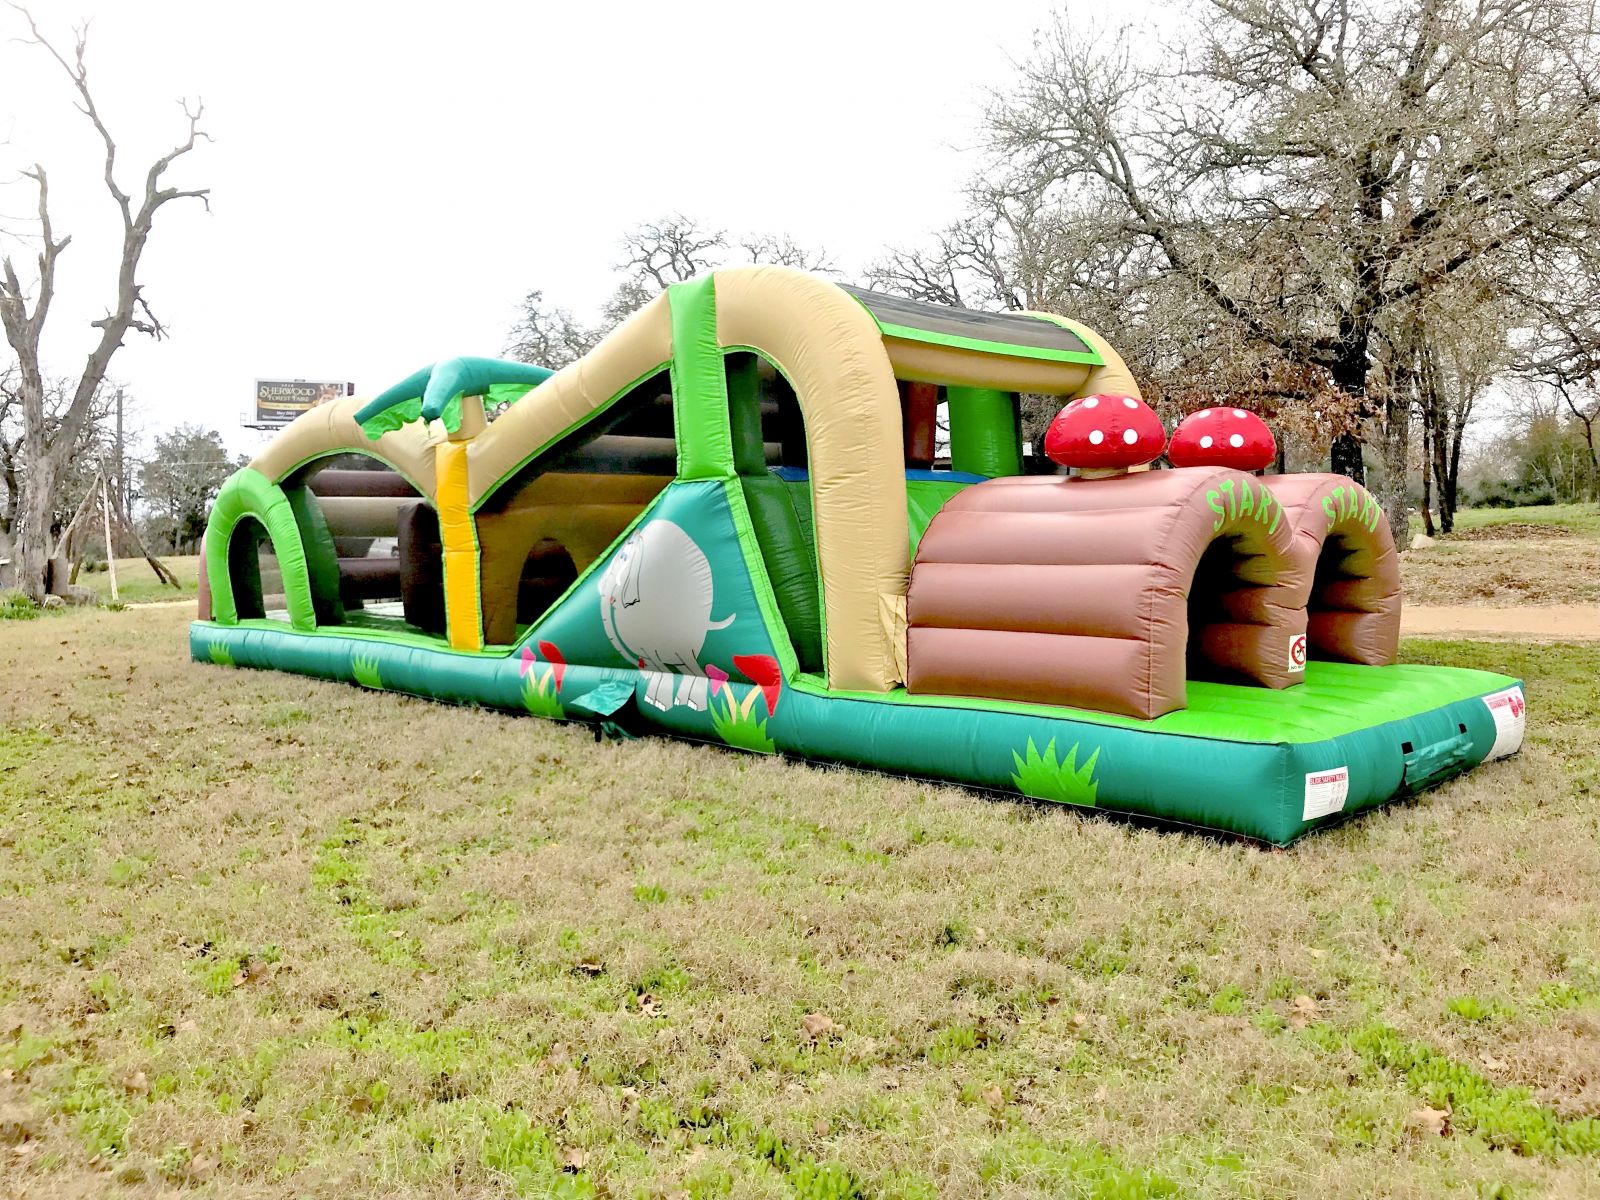 Exteme Obstacle Course rental in Austin Texas from Austin Bounce House Rentals